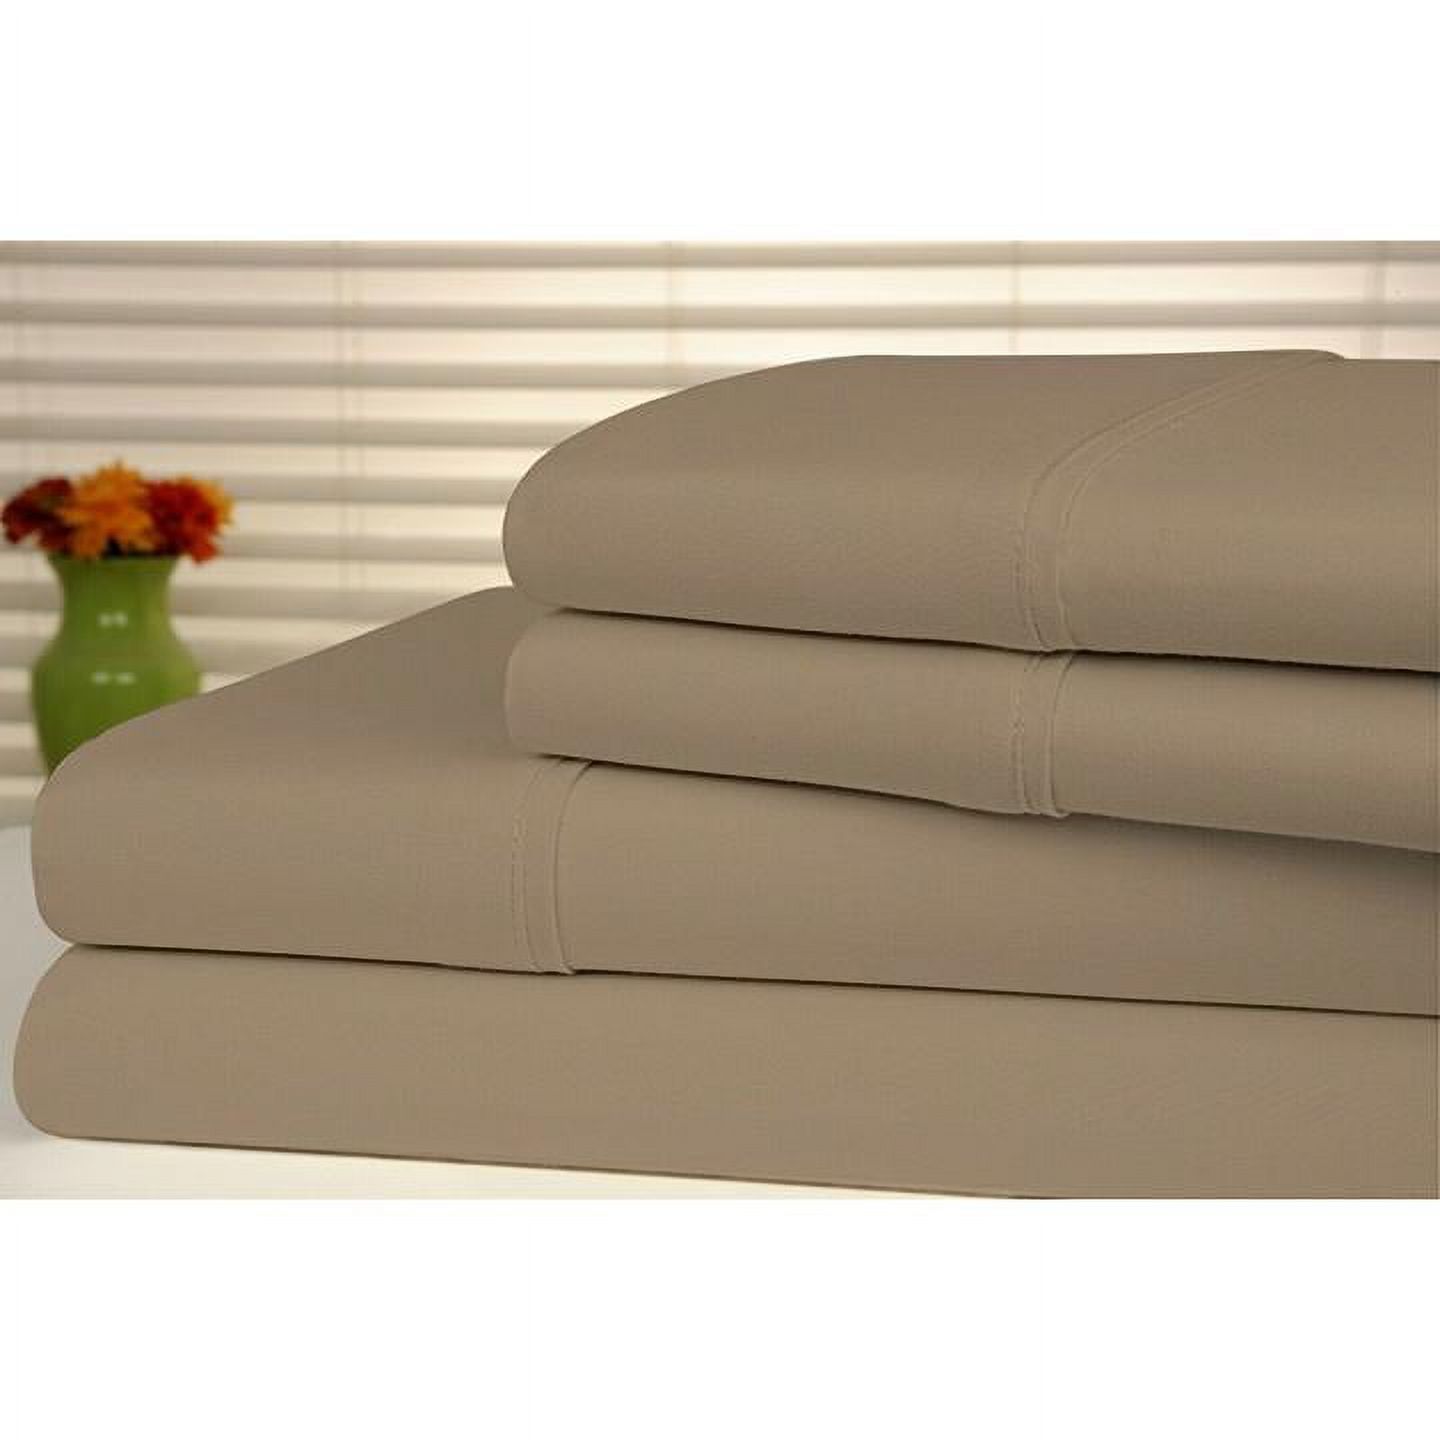 Bamboo Comfort  King Size Bamboo Luxury Solid Sheet Set, White - 4 Piece - image 9 of 21